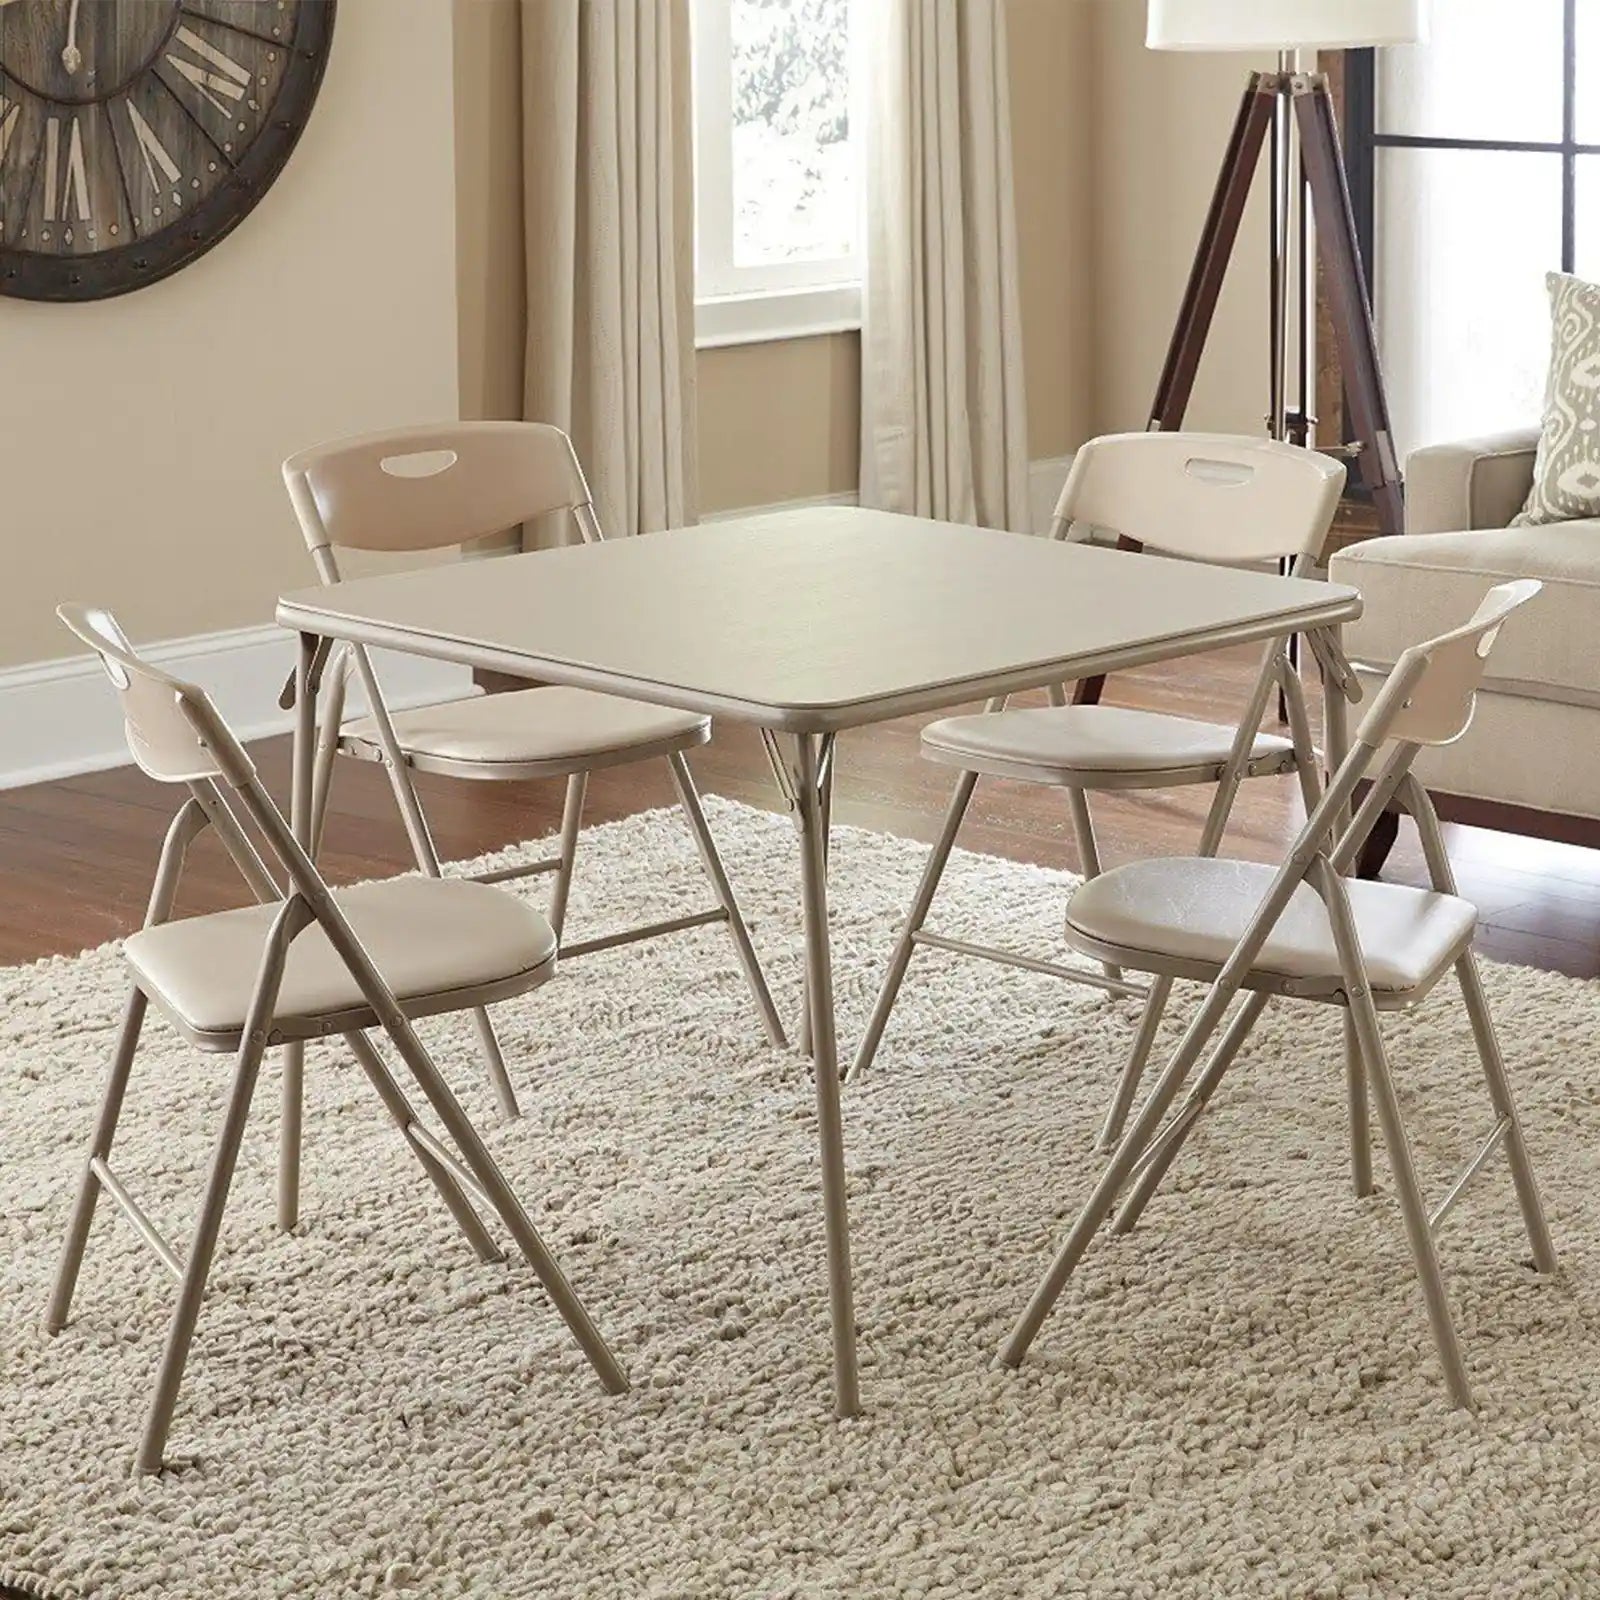 5-Piece Folding Table and Chair Set